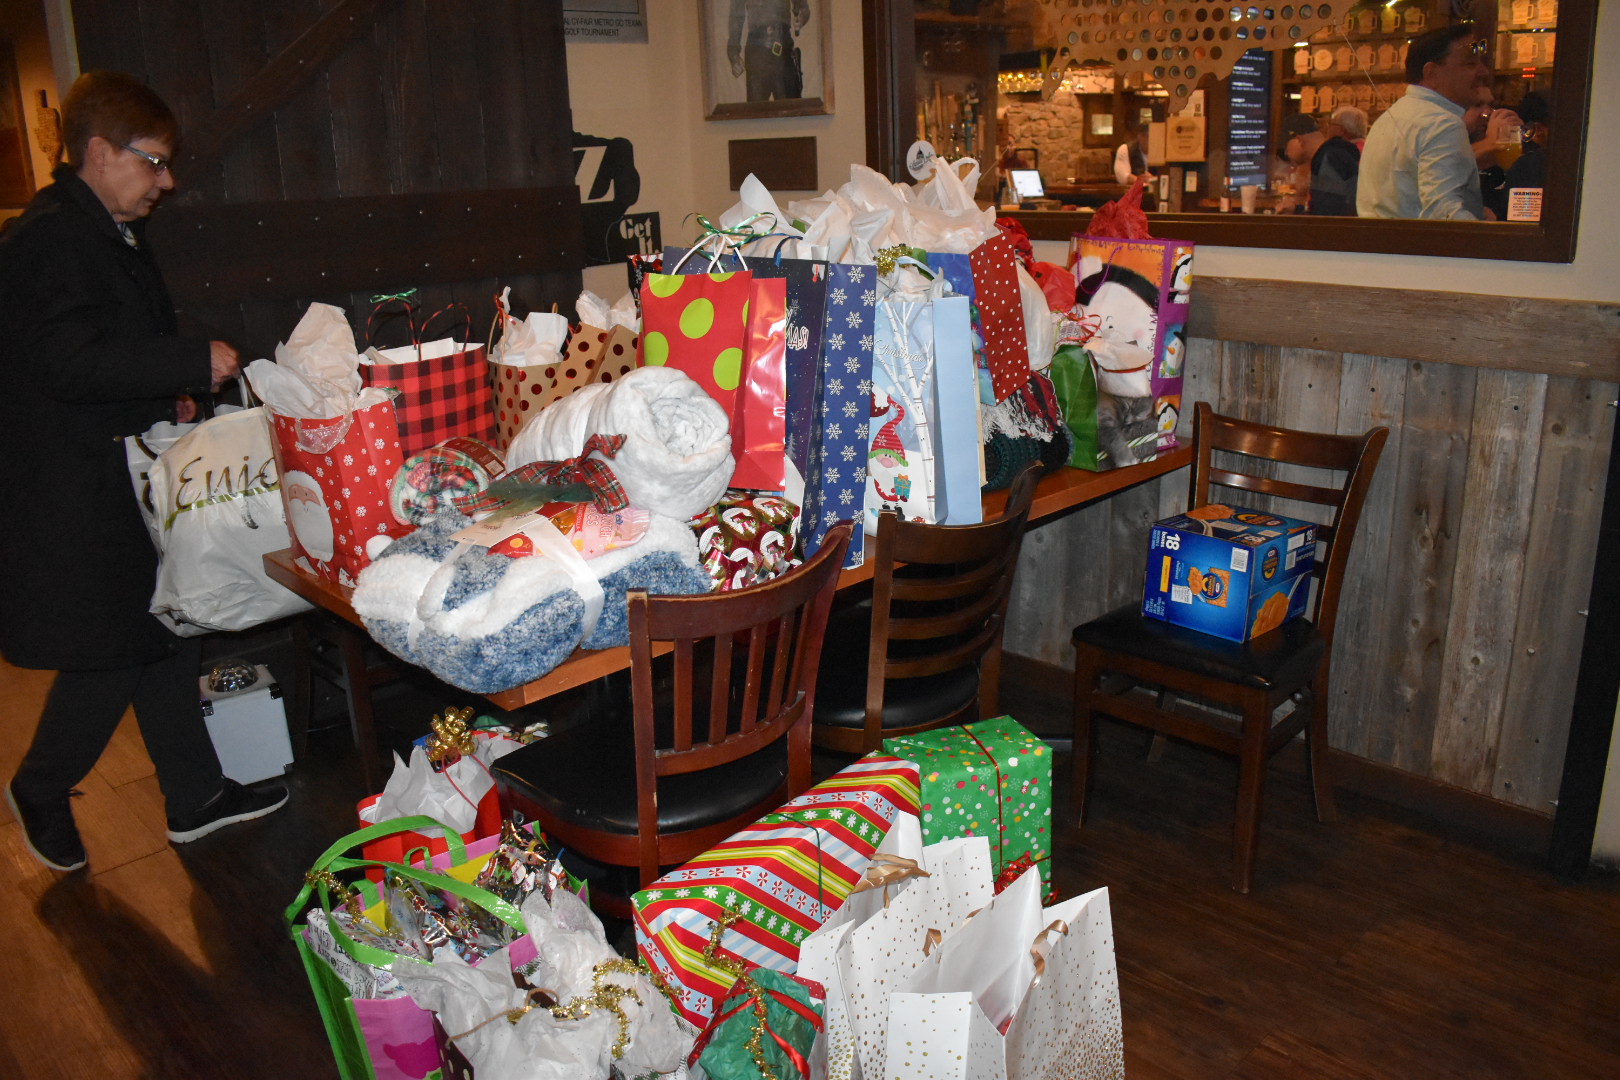 CWC's Gifts for Bear Creek Meals on Wheels